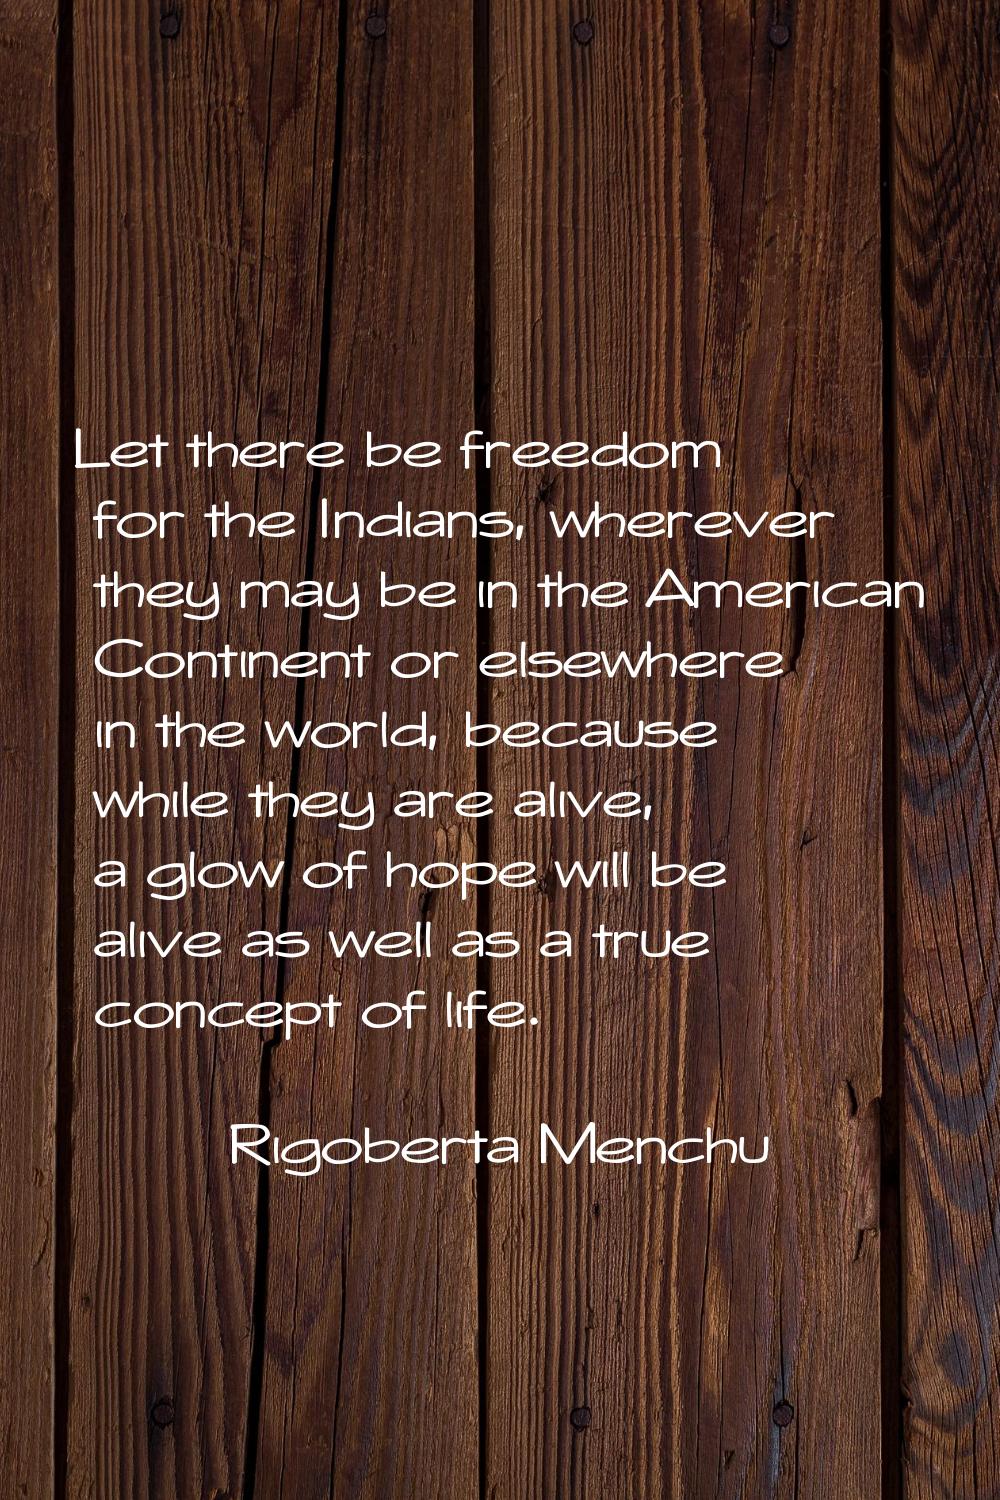 Let there be freedom for the Indians, wherever they may be in the American Continent or elsewhere i